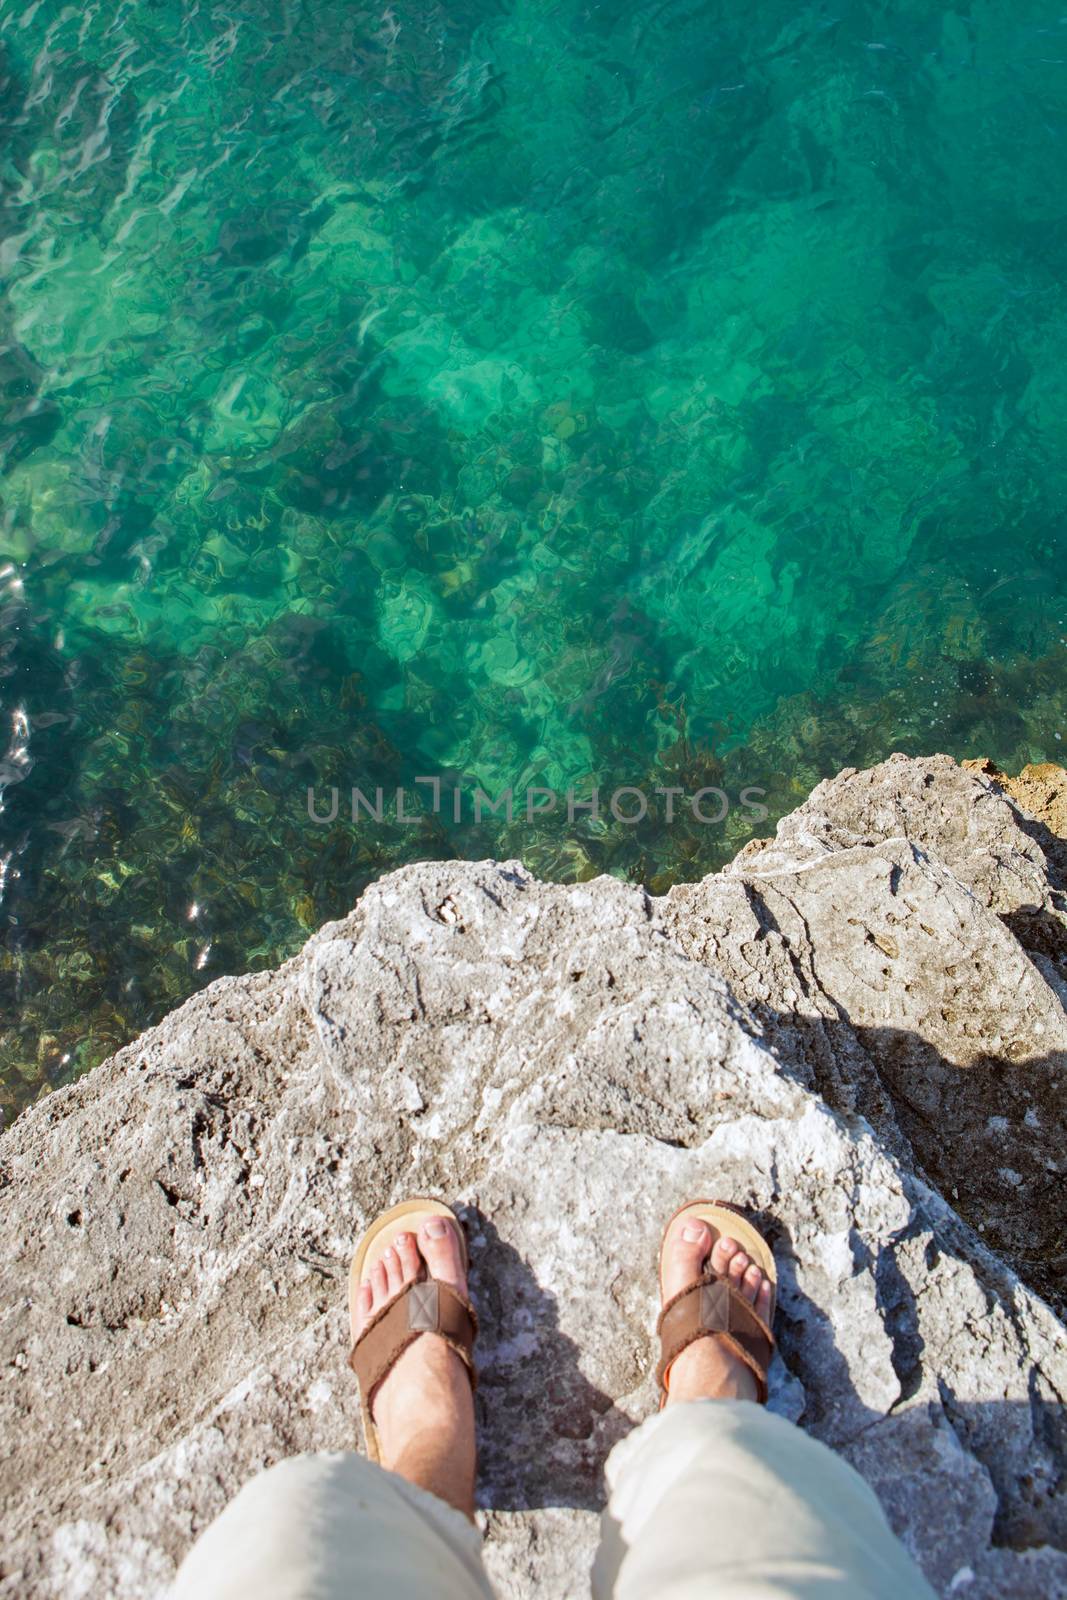 Self portrait showing a mans feet standing on the edge of a cliff by the tropical ocean waters in Bermuda.